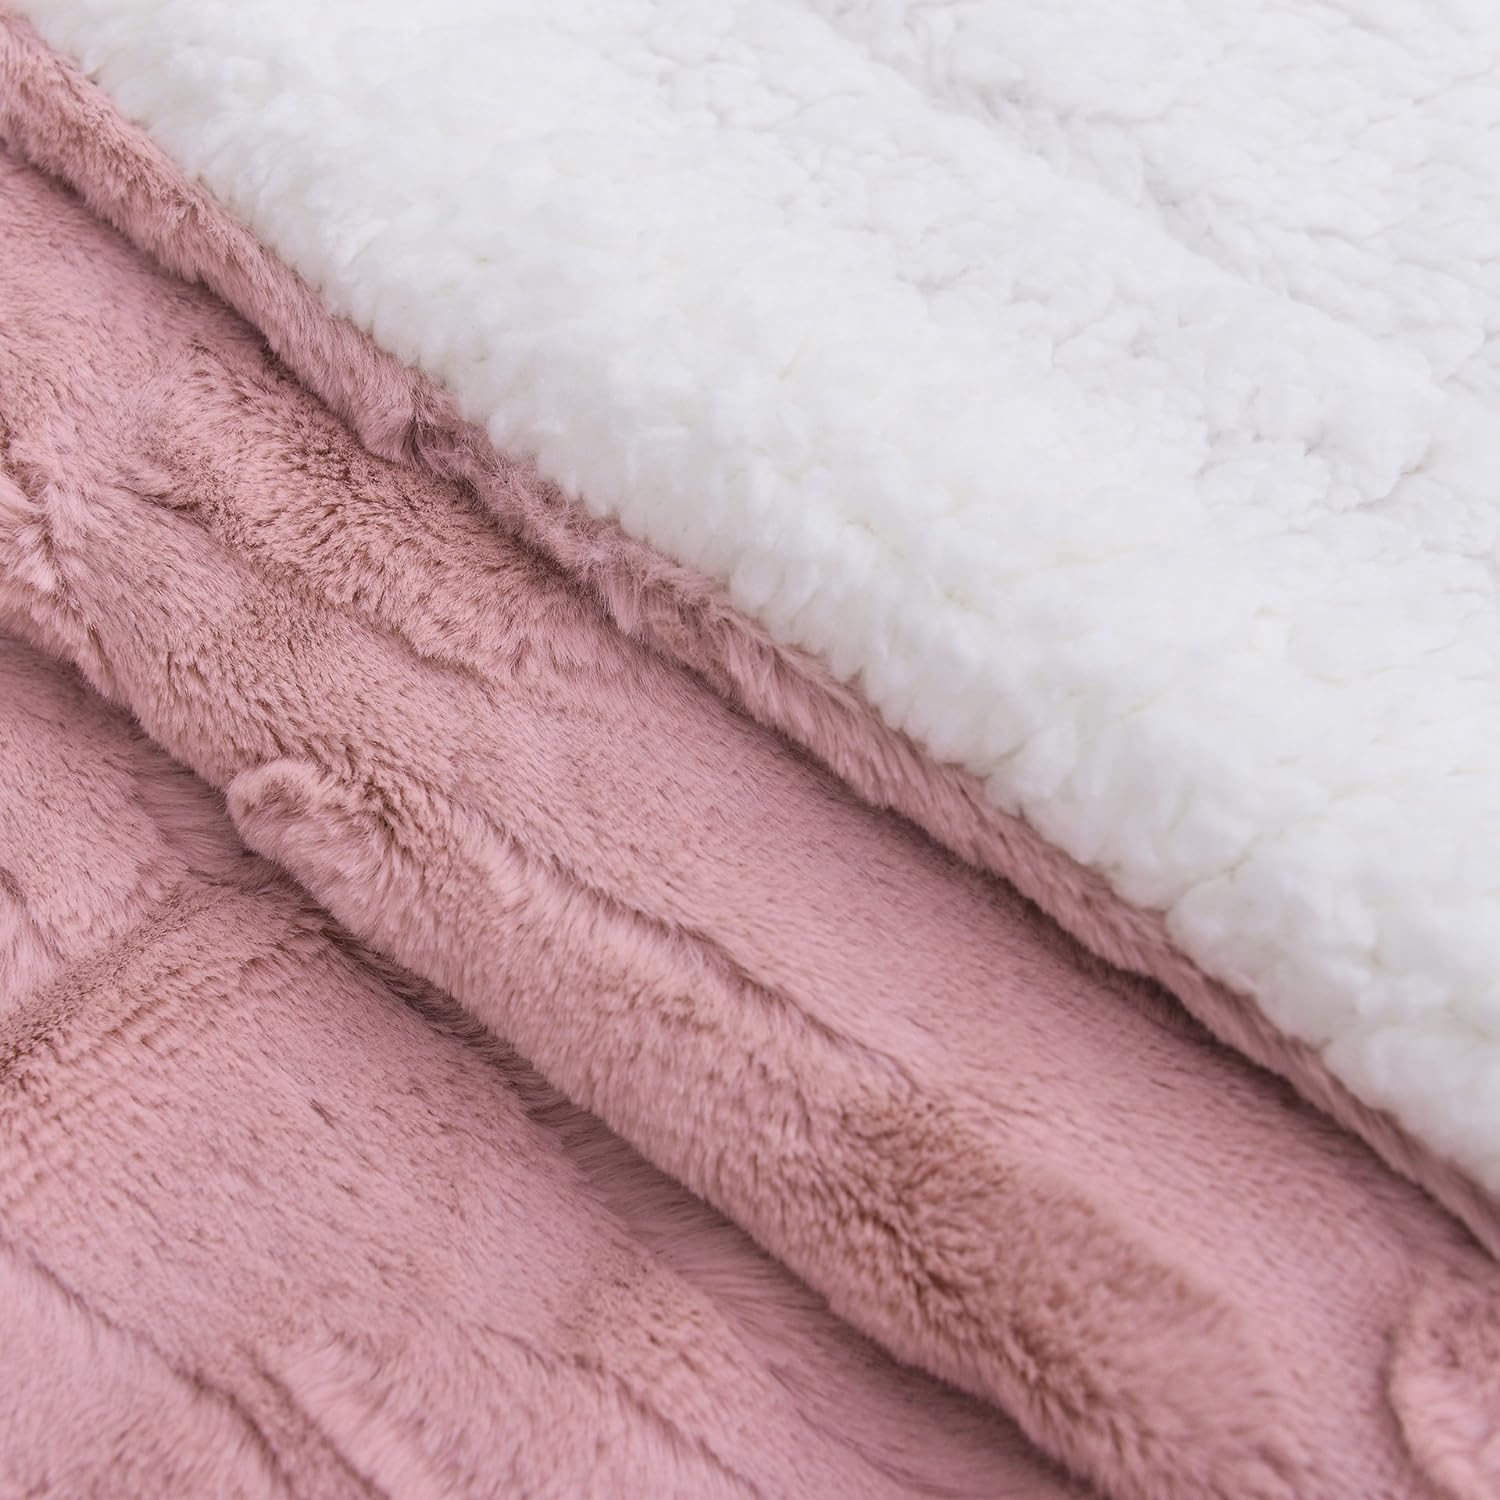 Invite relaxation with a faux fur throw blanket. Rose Pink faux fur front and white sherpa back side